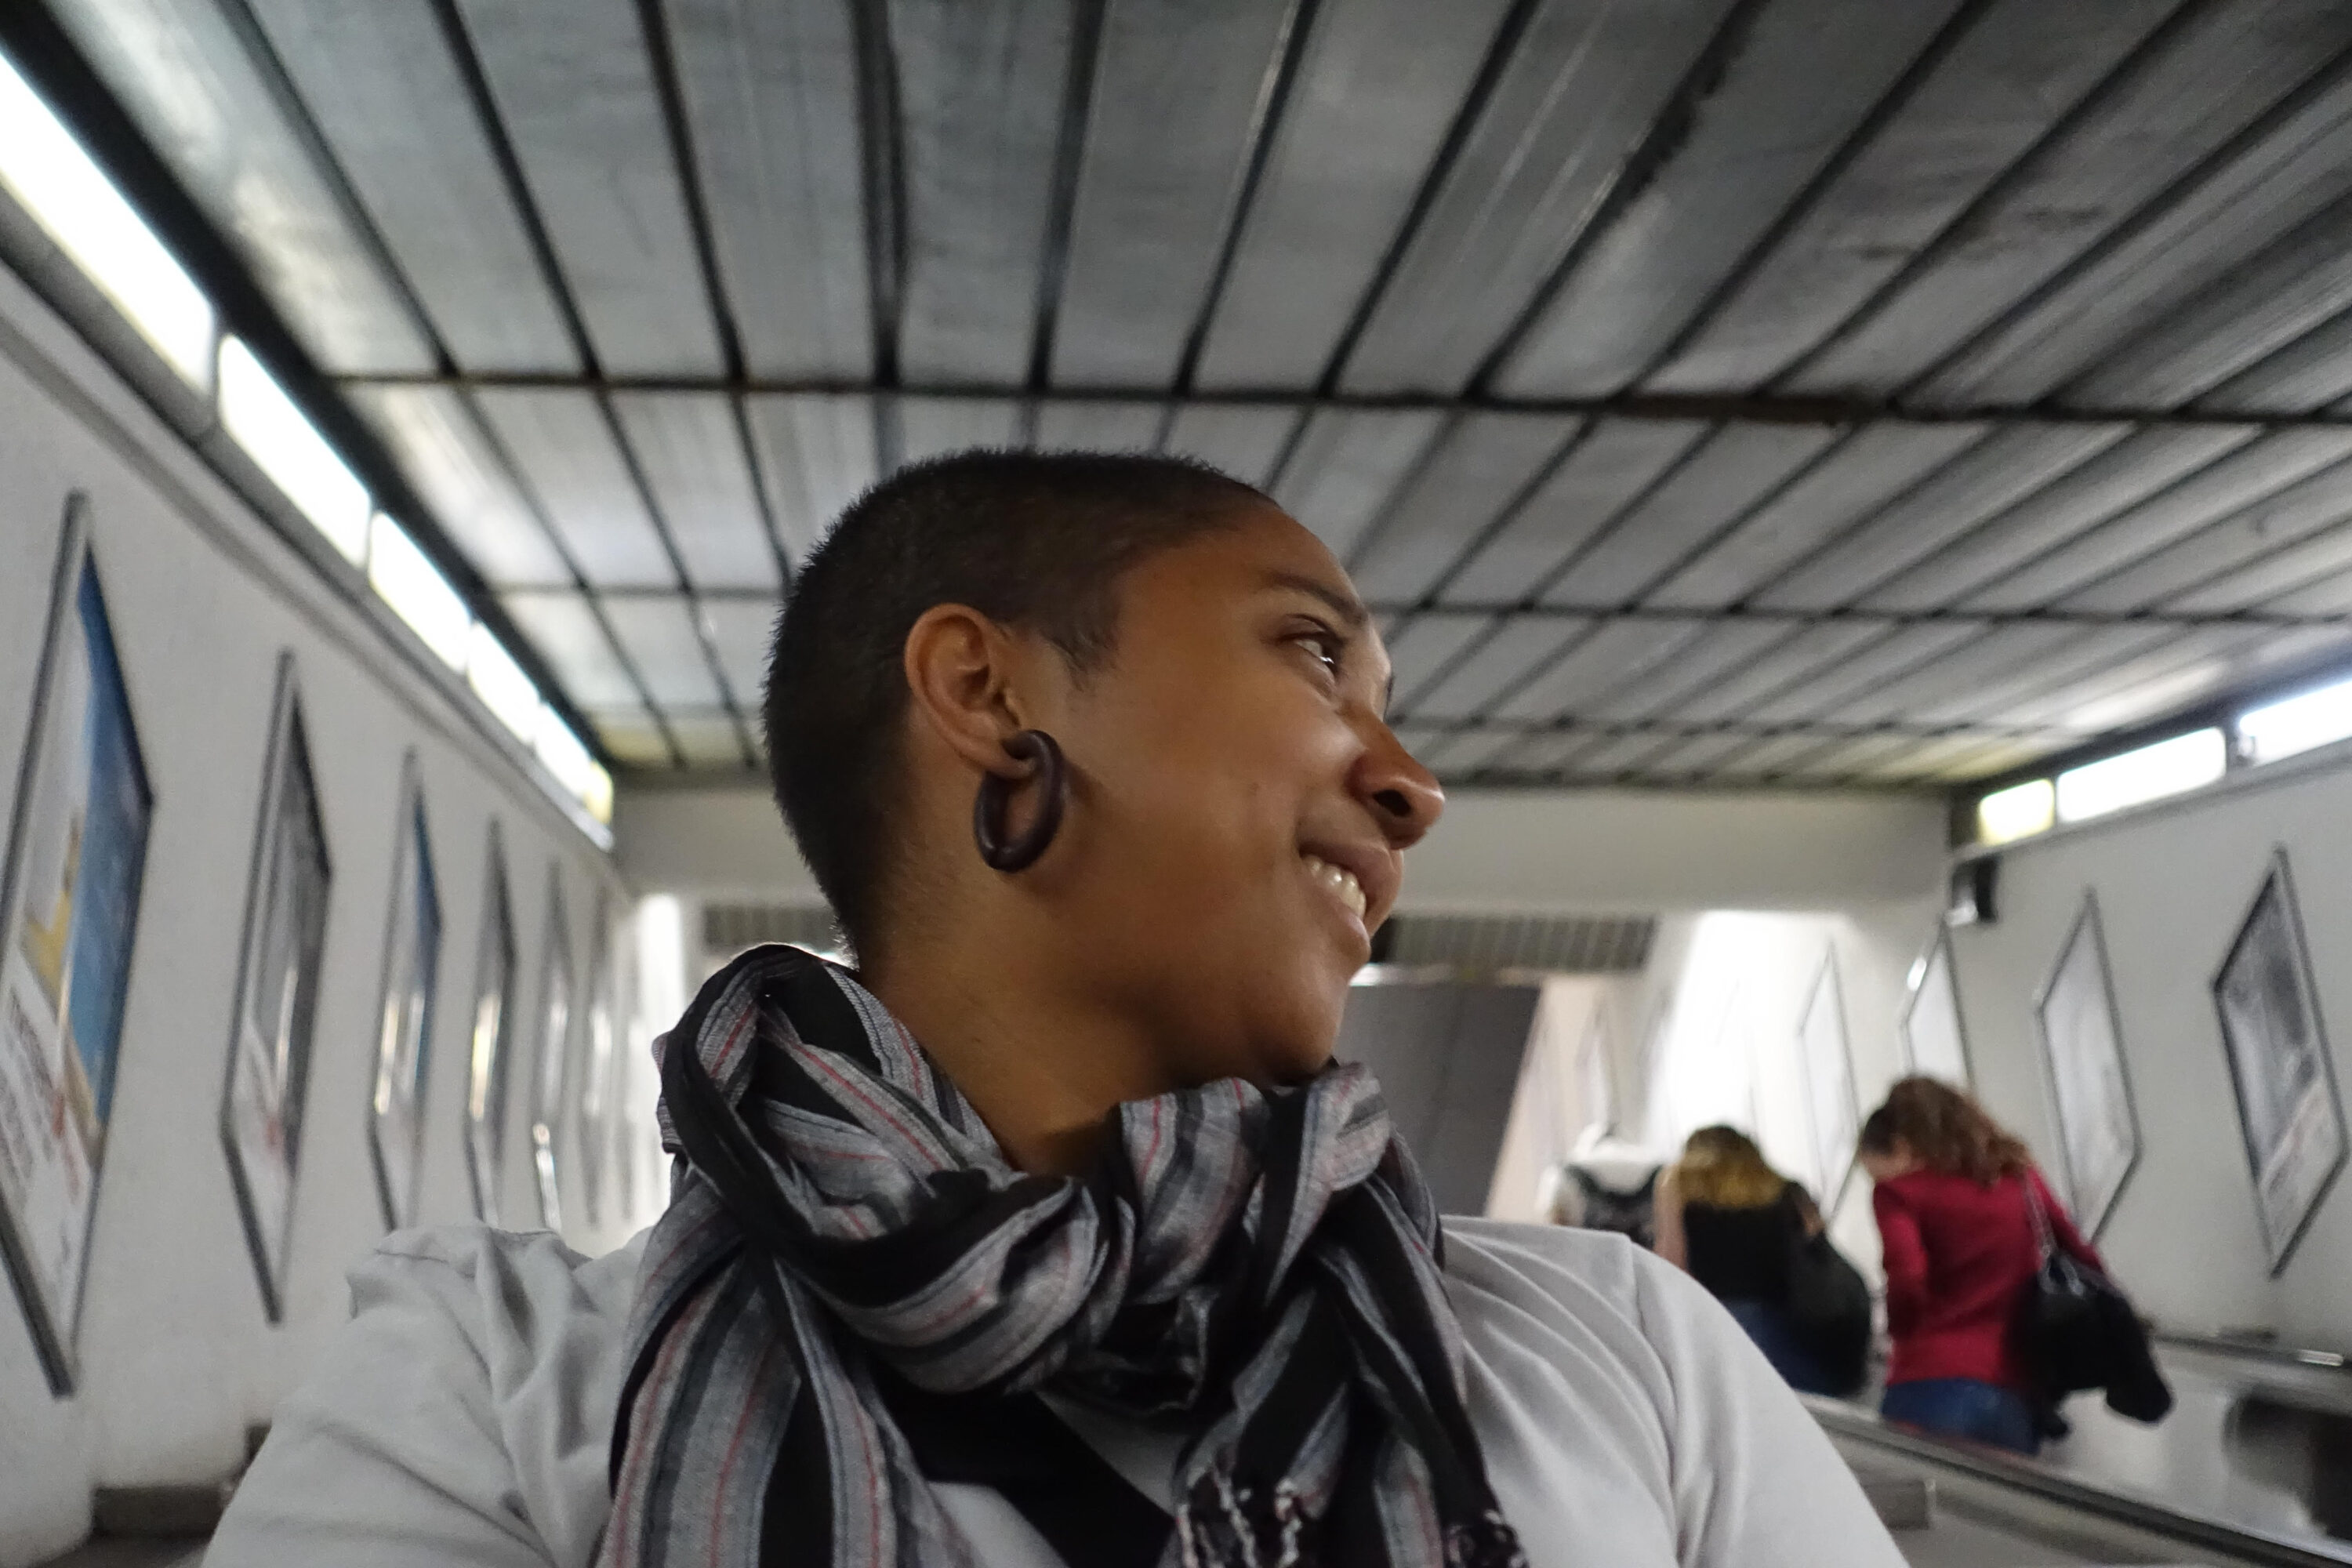 A portrait photo of a dark-skinned woman with a shaved head looking off to the right and smiling. She wears a black, white, and red striped scarf tied around her neck atop a white shirt.